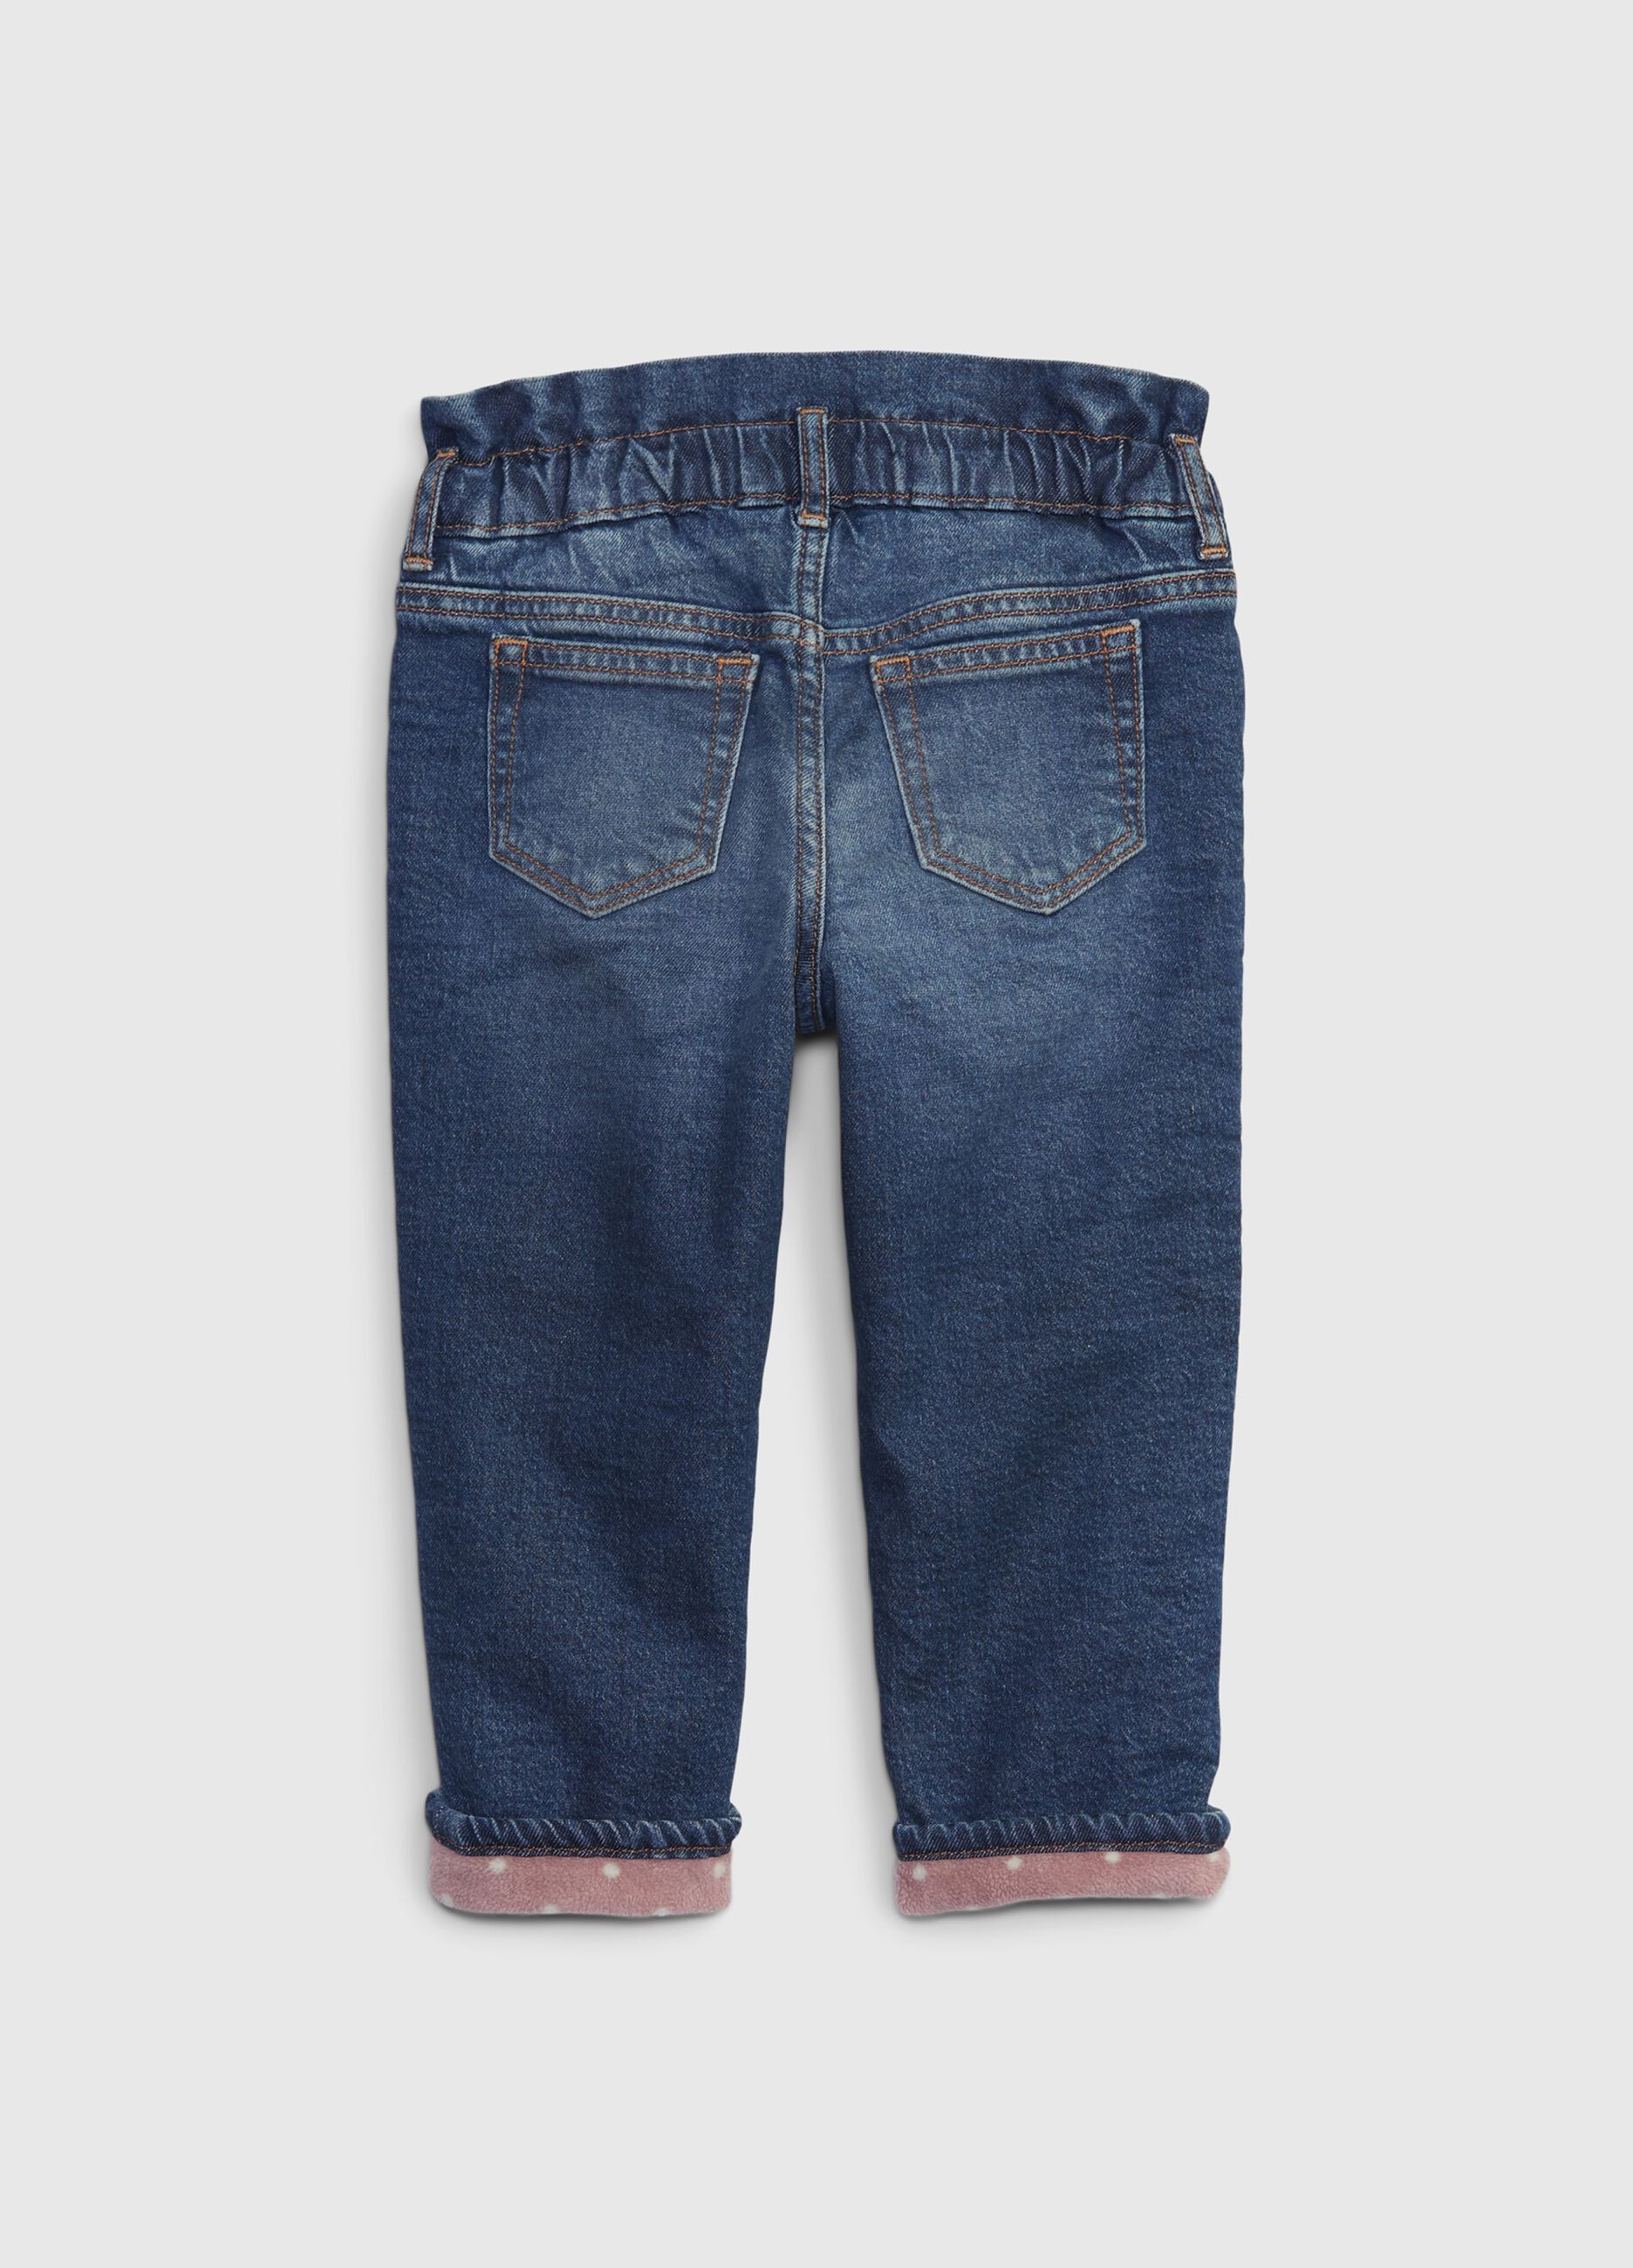 Mum-fit jeans with fleece polka dot lining